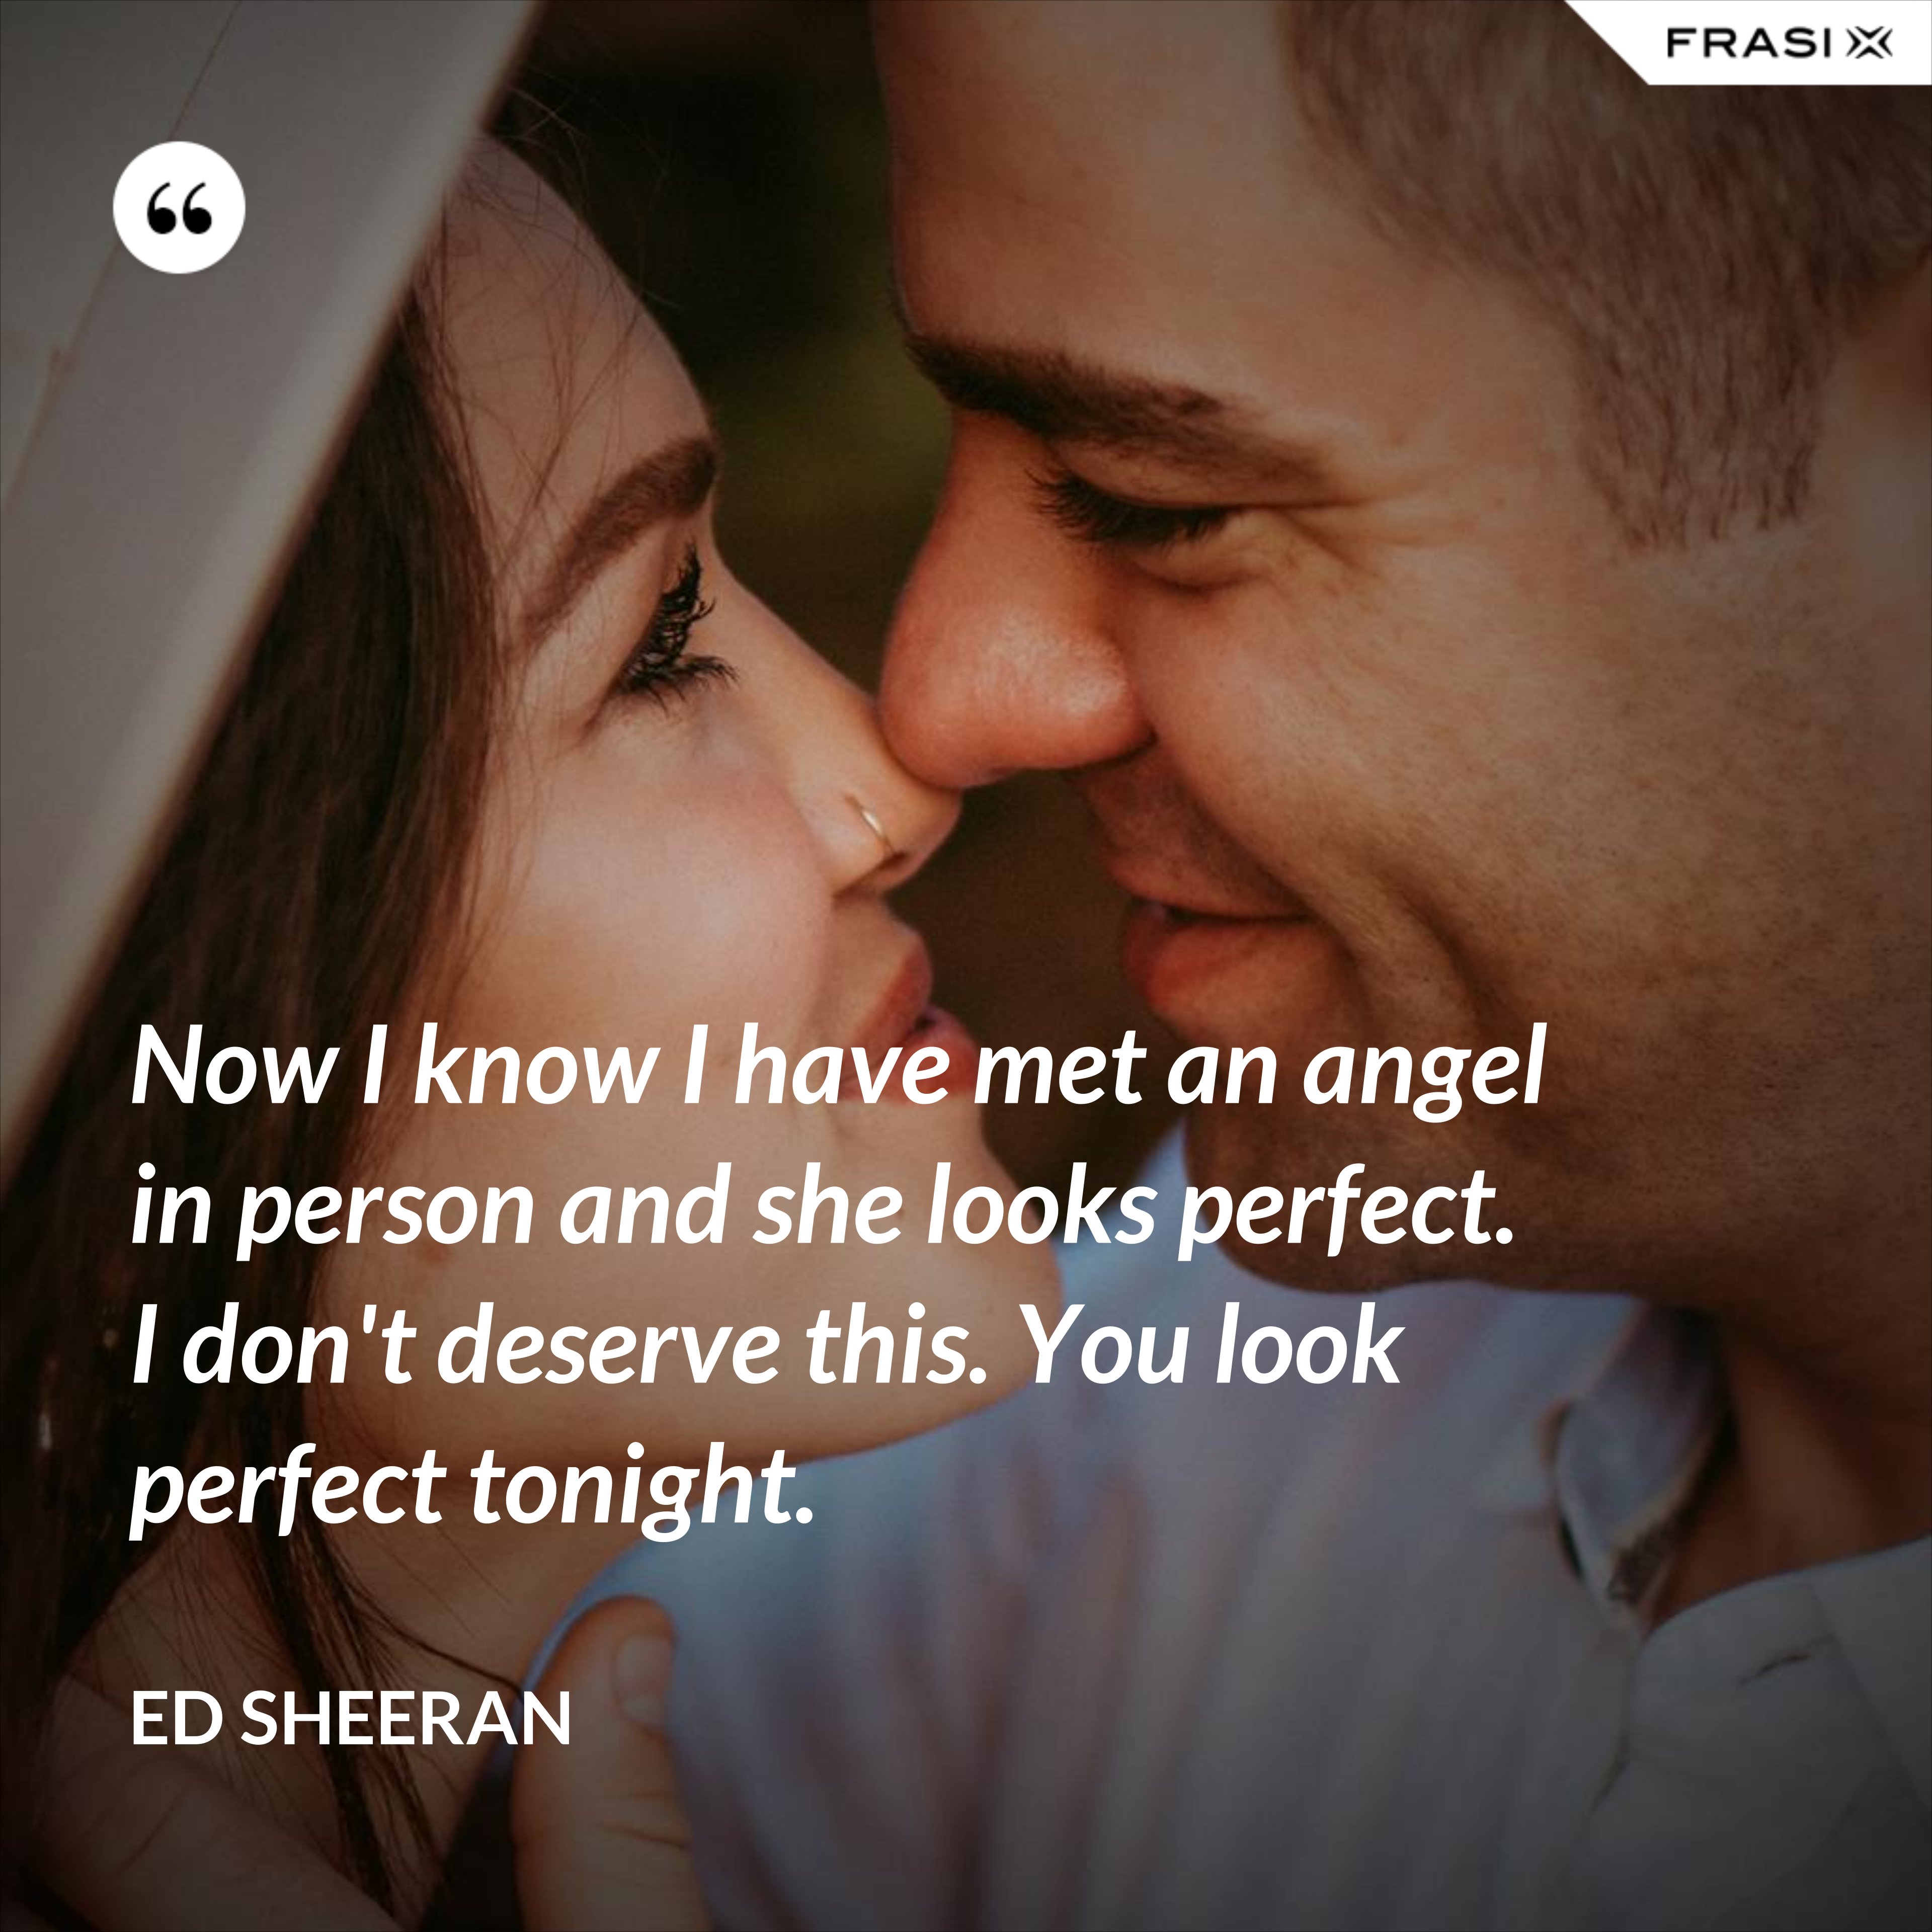 Now I know I have met an angel in person and she looks perfect. I don't deserve this. You look perfect tonight. - Ed Sheeran